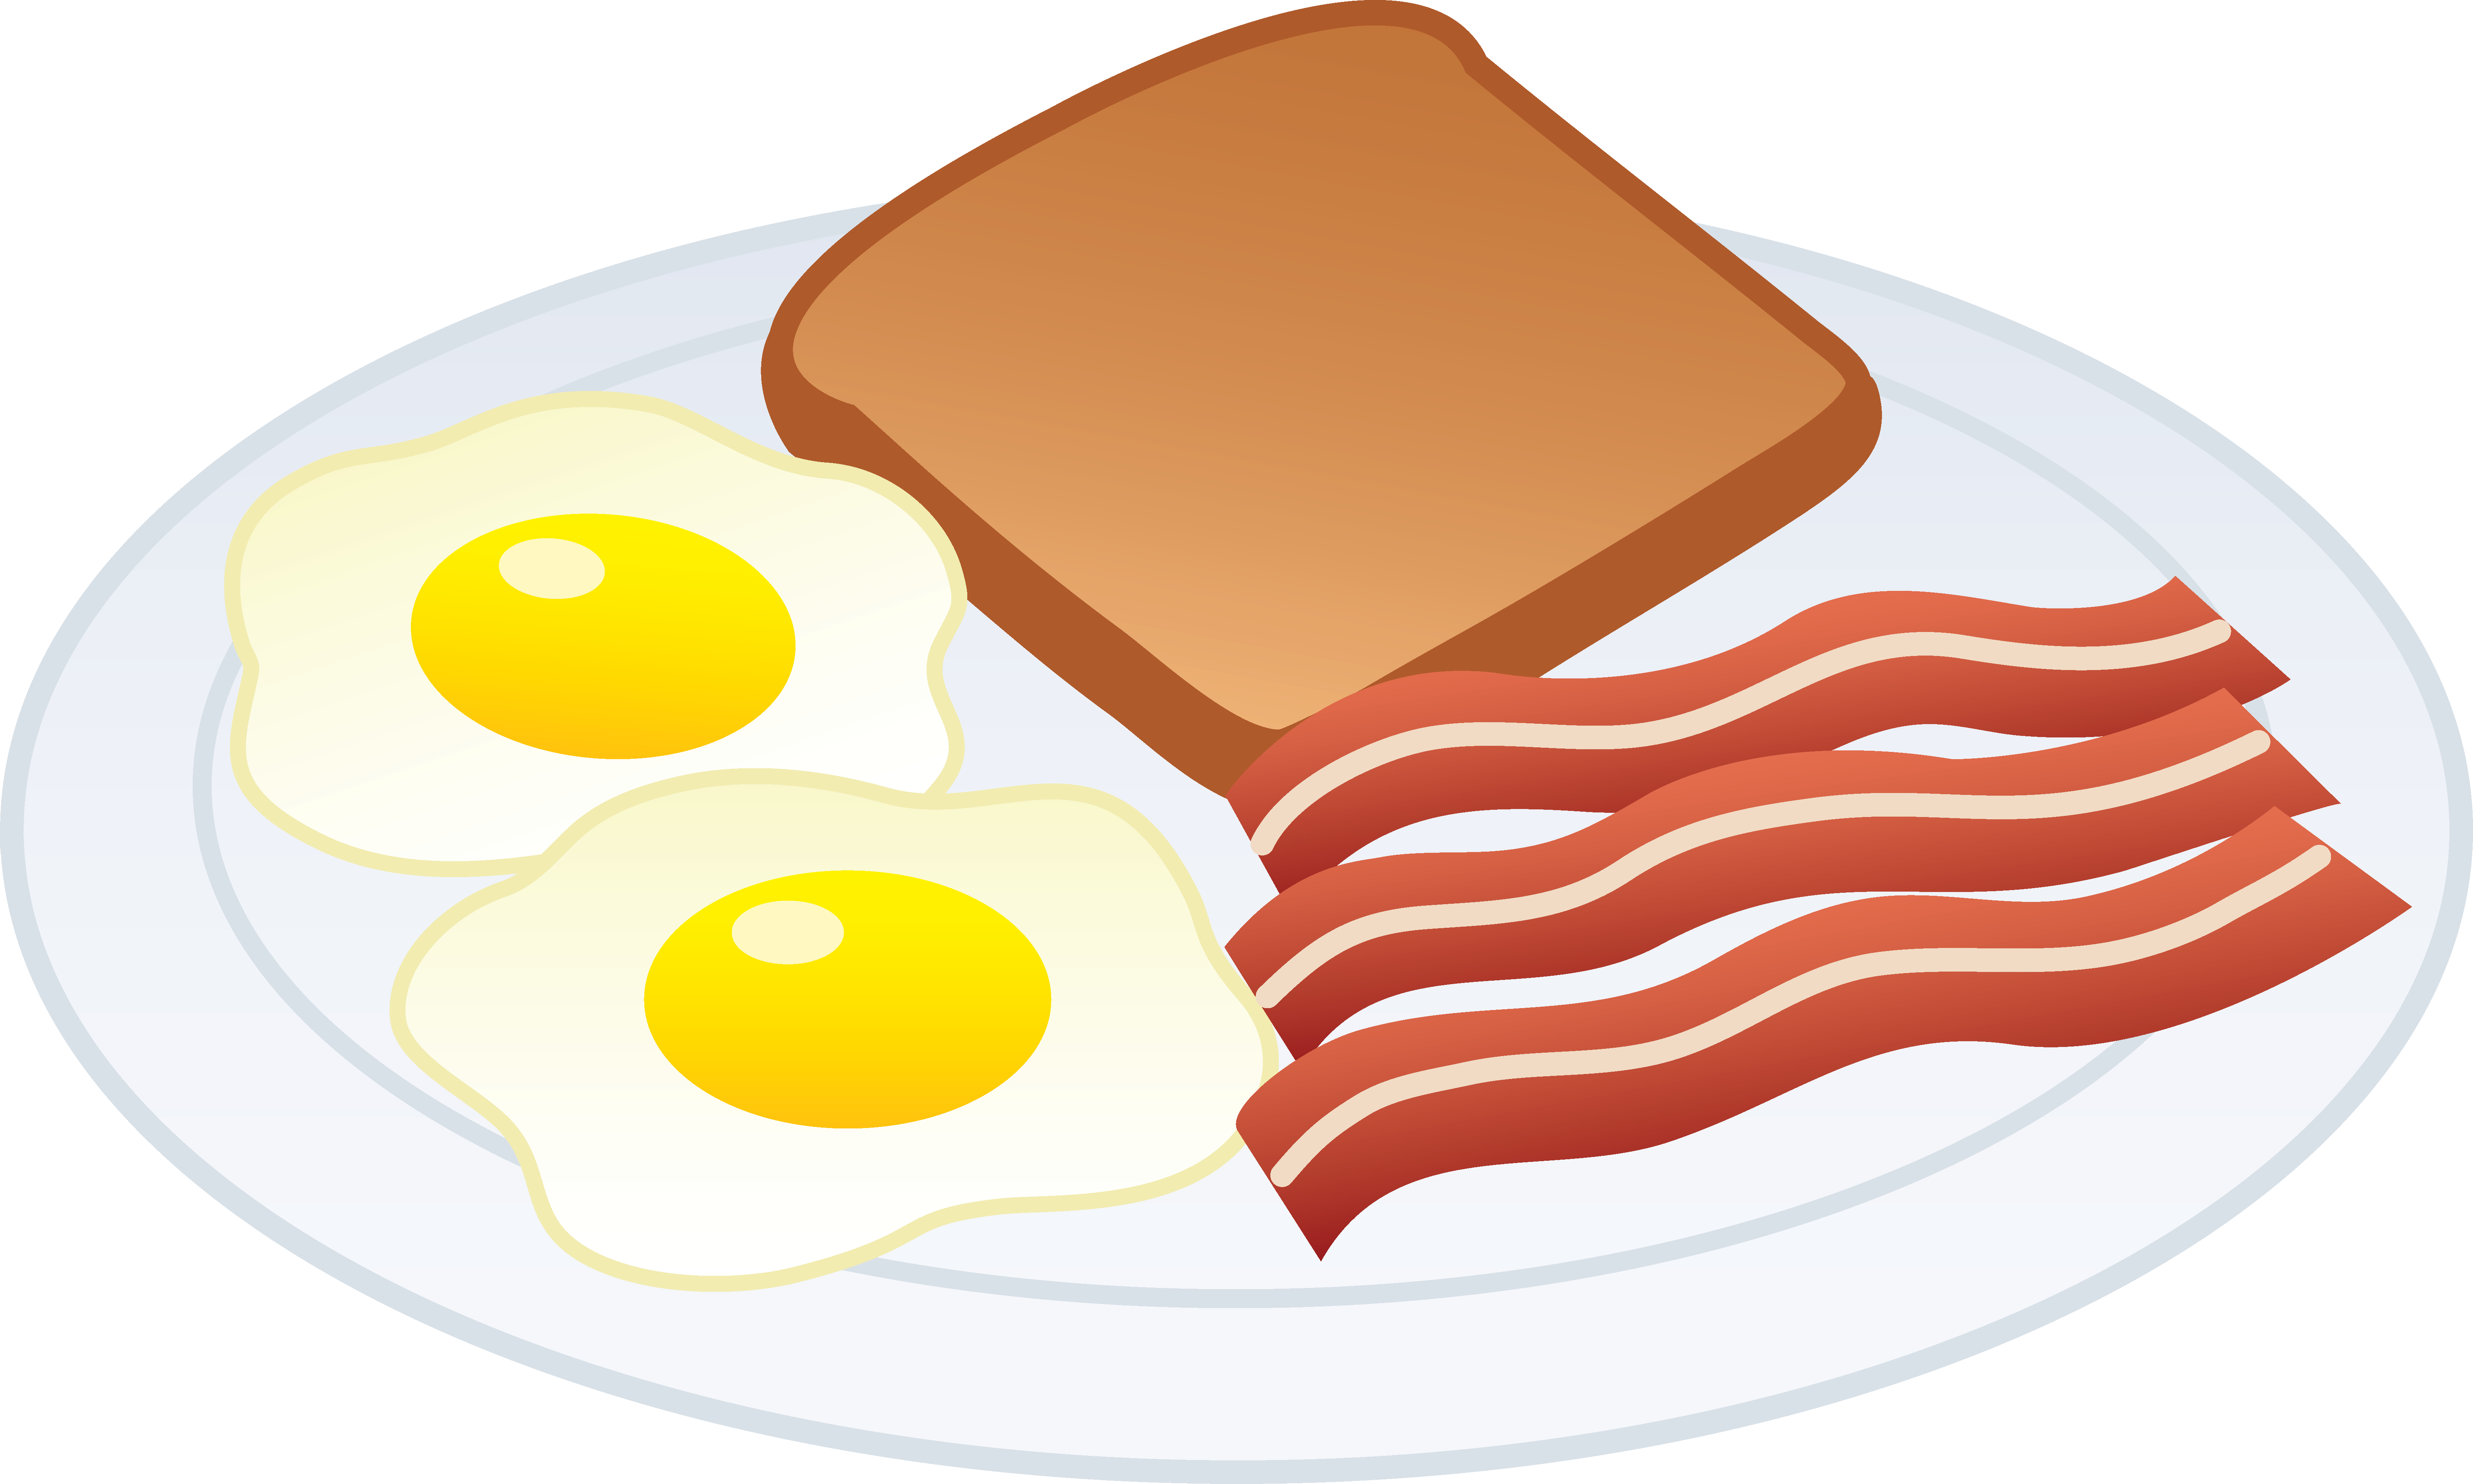 Free Breakfast Clipart Pictures - Clipartix